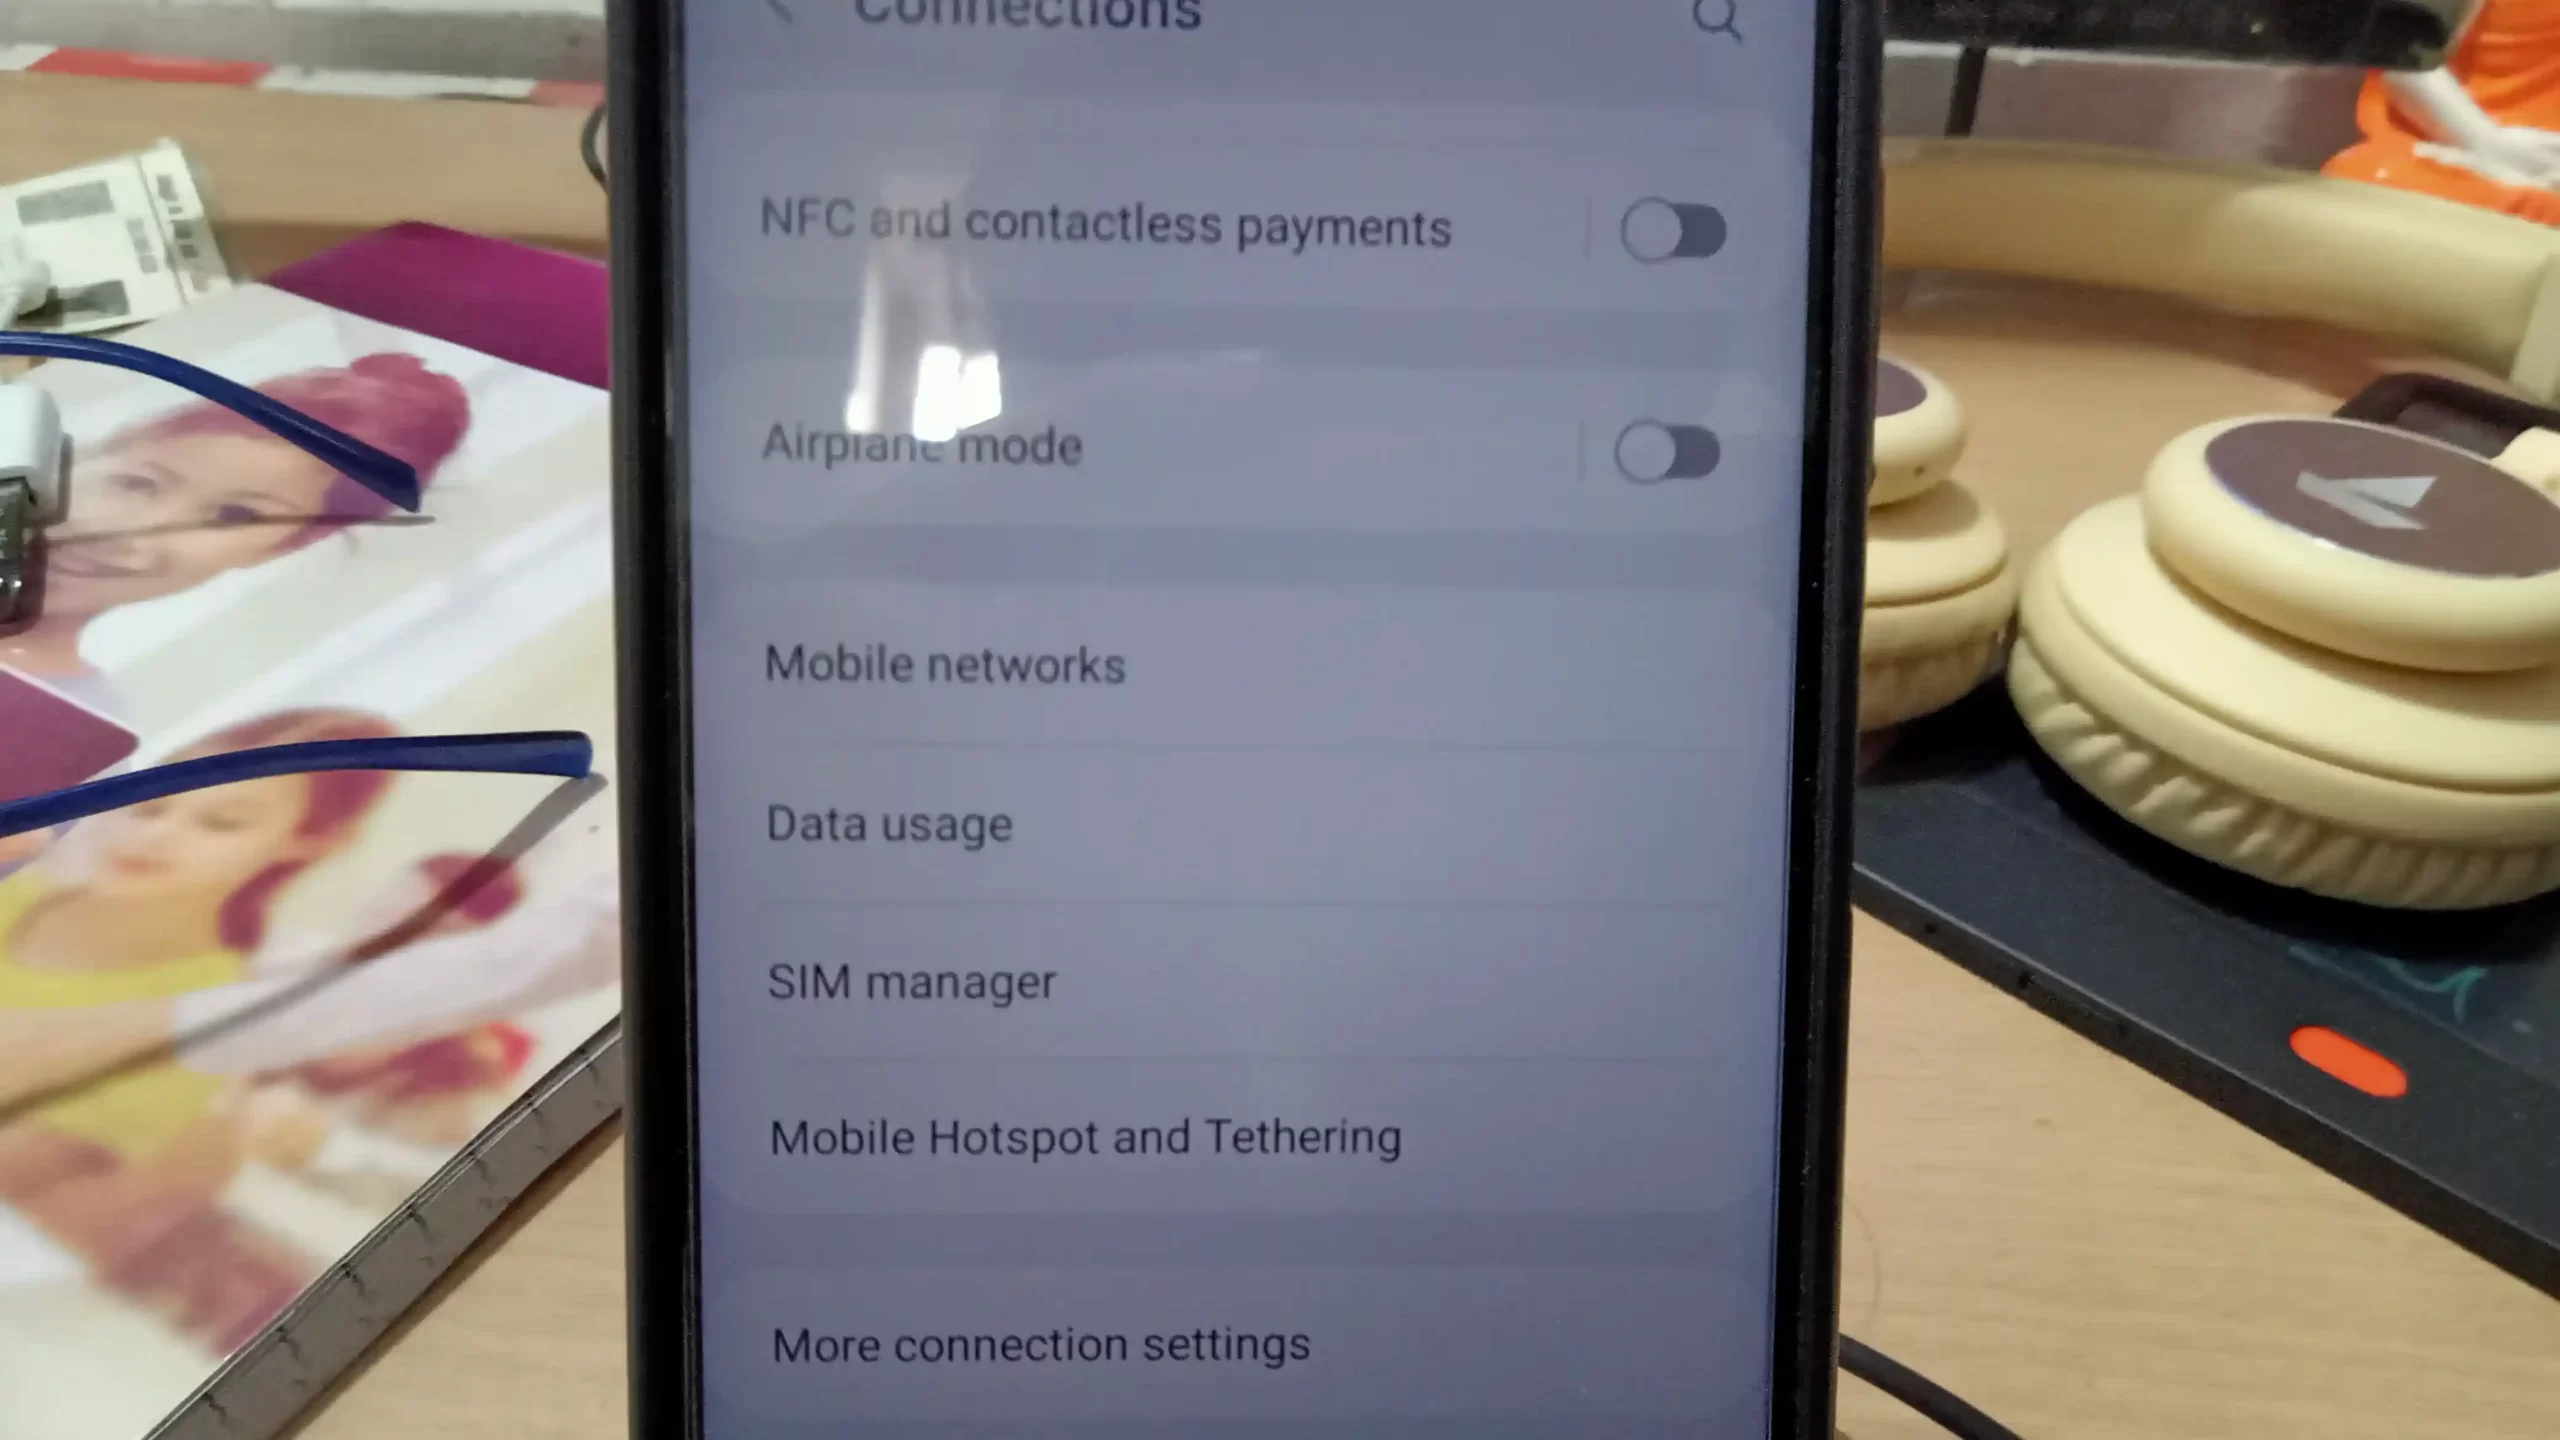 mobile networks in the conenction settings